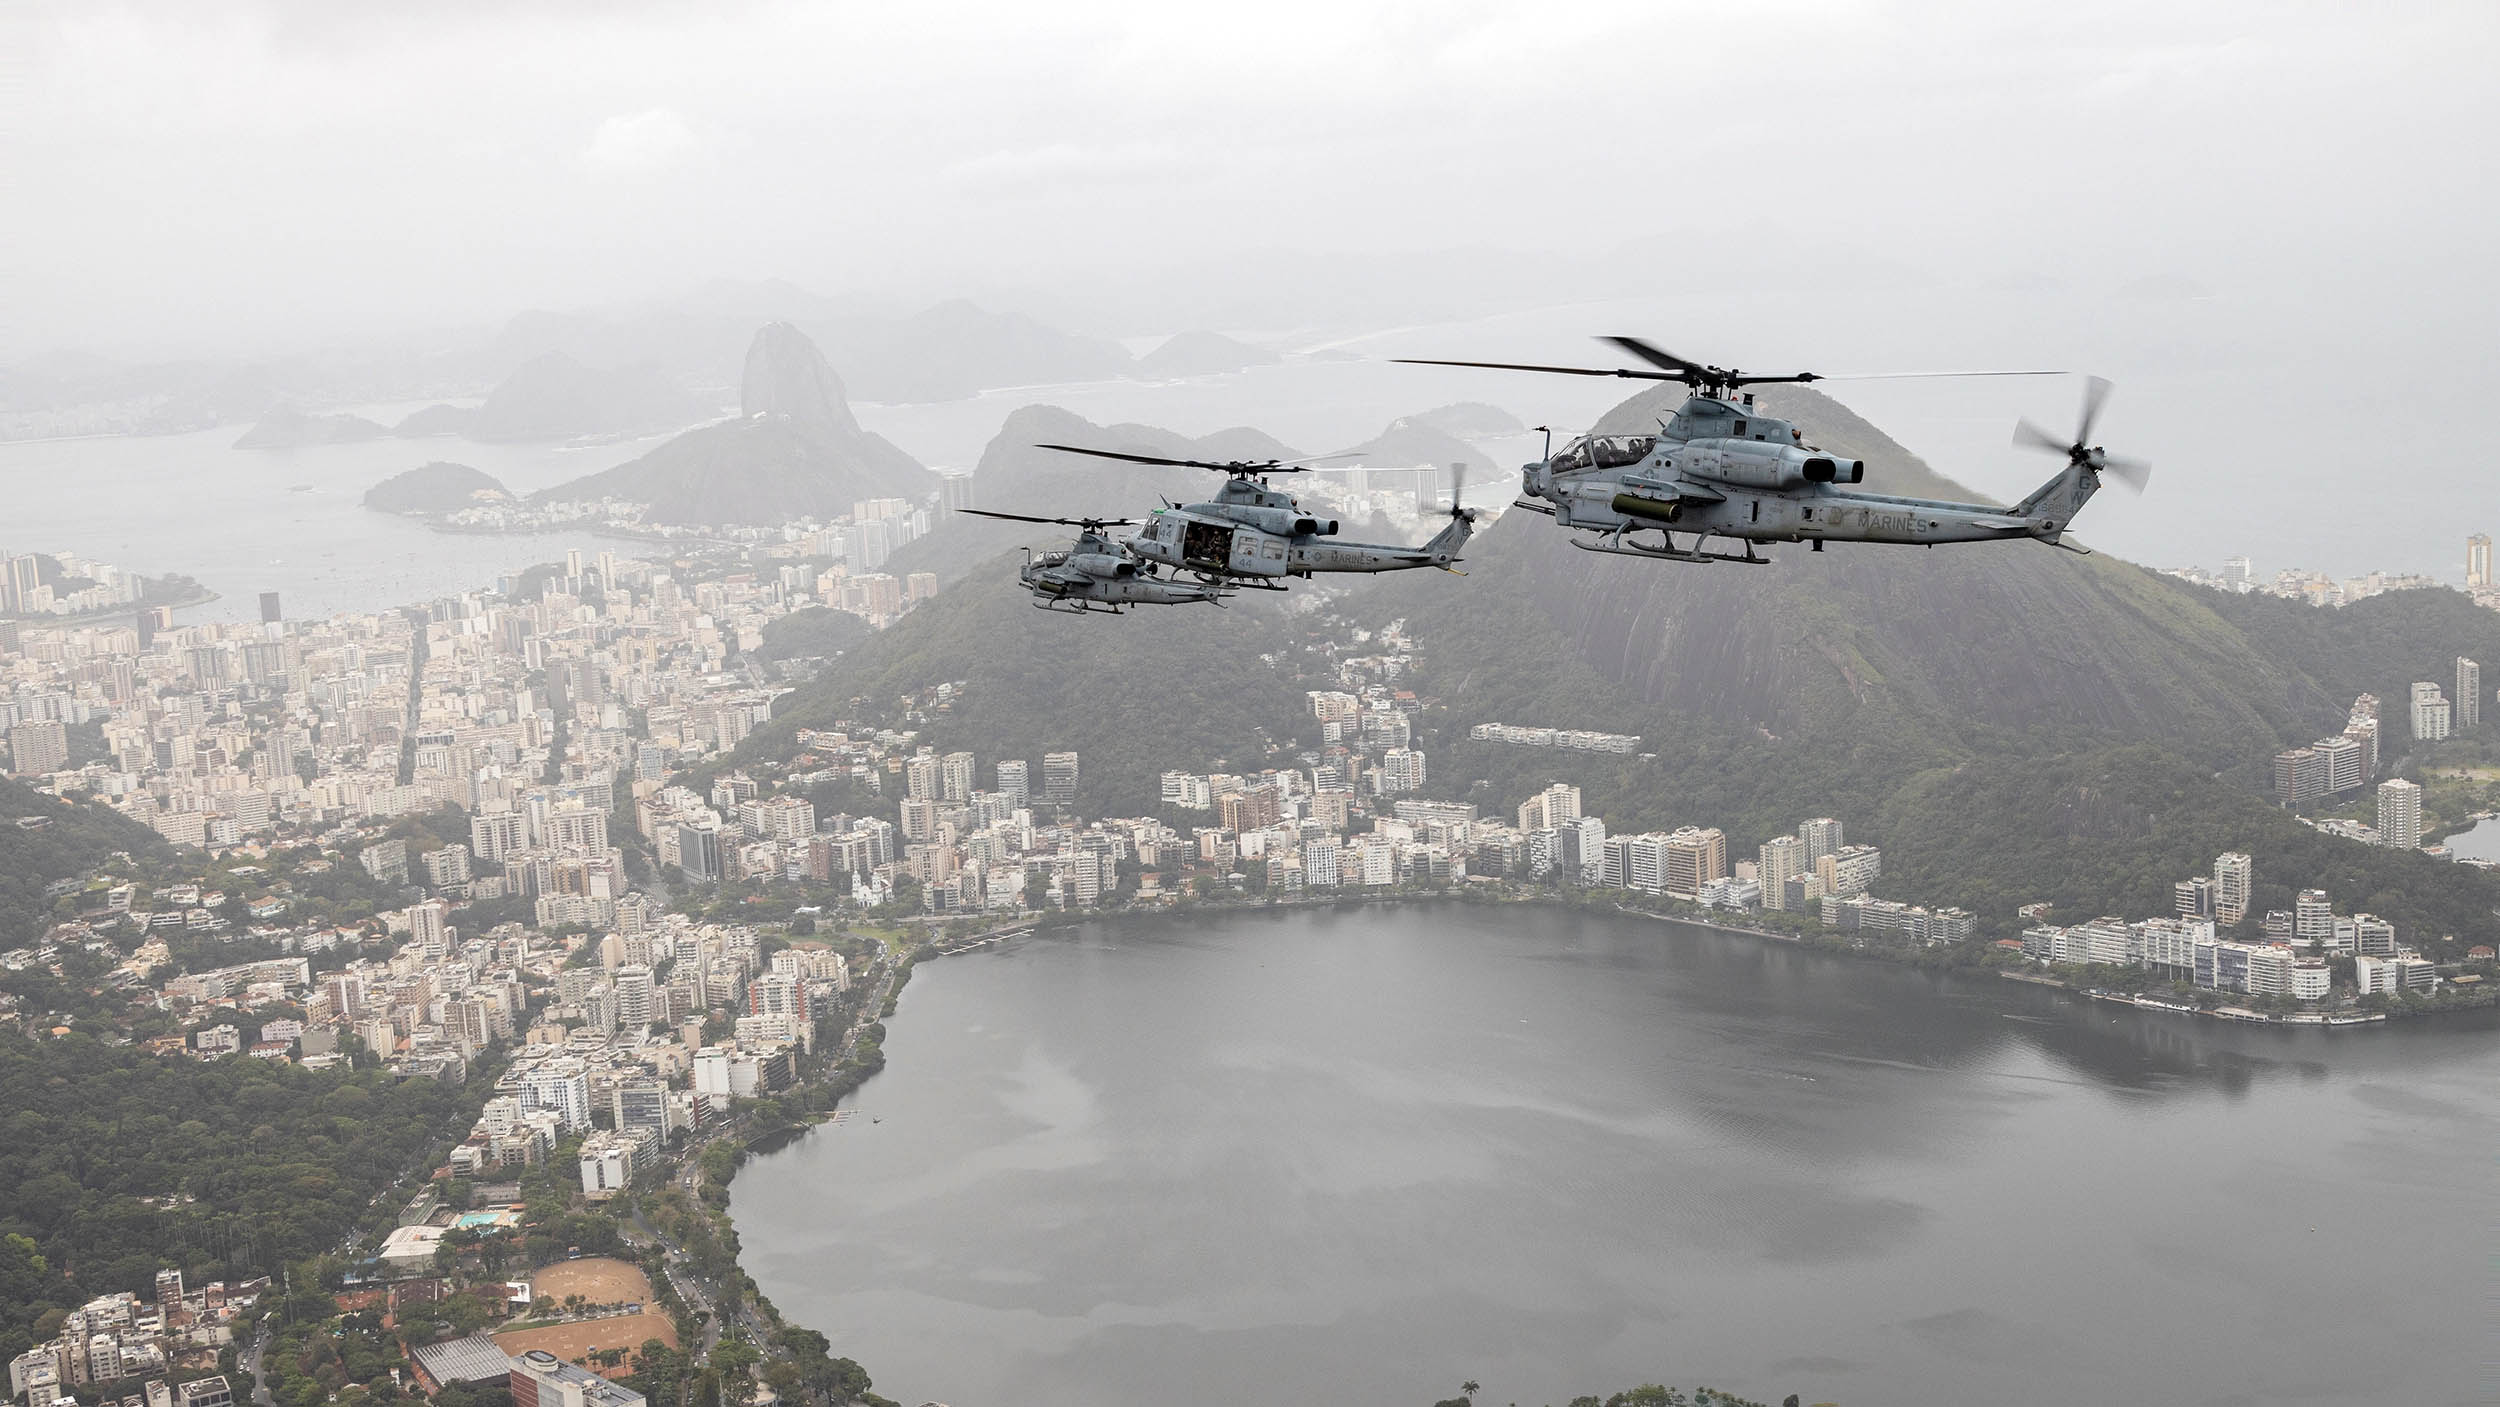 Marines with Marine Light Attack Helicopter Squadron (HMLA) 773, 4th Marine Aircraft Wing, Marine Forces Reserve, in support of Special Purpose Marine Air-Ground Task Force Unitas LXIII, conduct flight operations near Christ the Redeemer statue at Corcovado Mountain, Rio de Janeiro, during exercise Unitas LXIII, September 12, 2022 (U.S. Marine Corps/Jonathan L. Gonzalez)